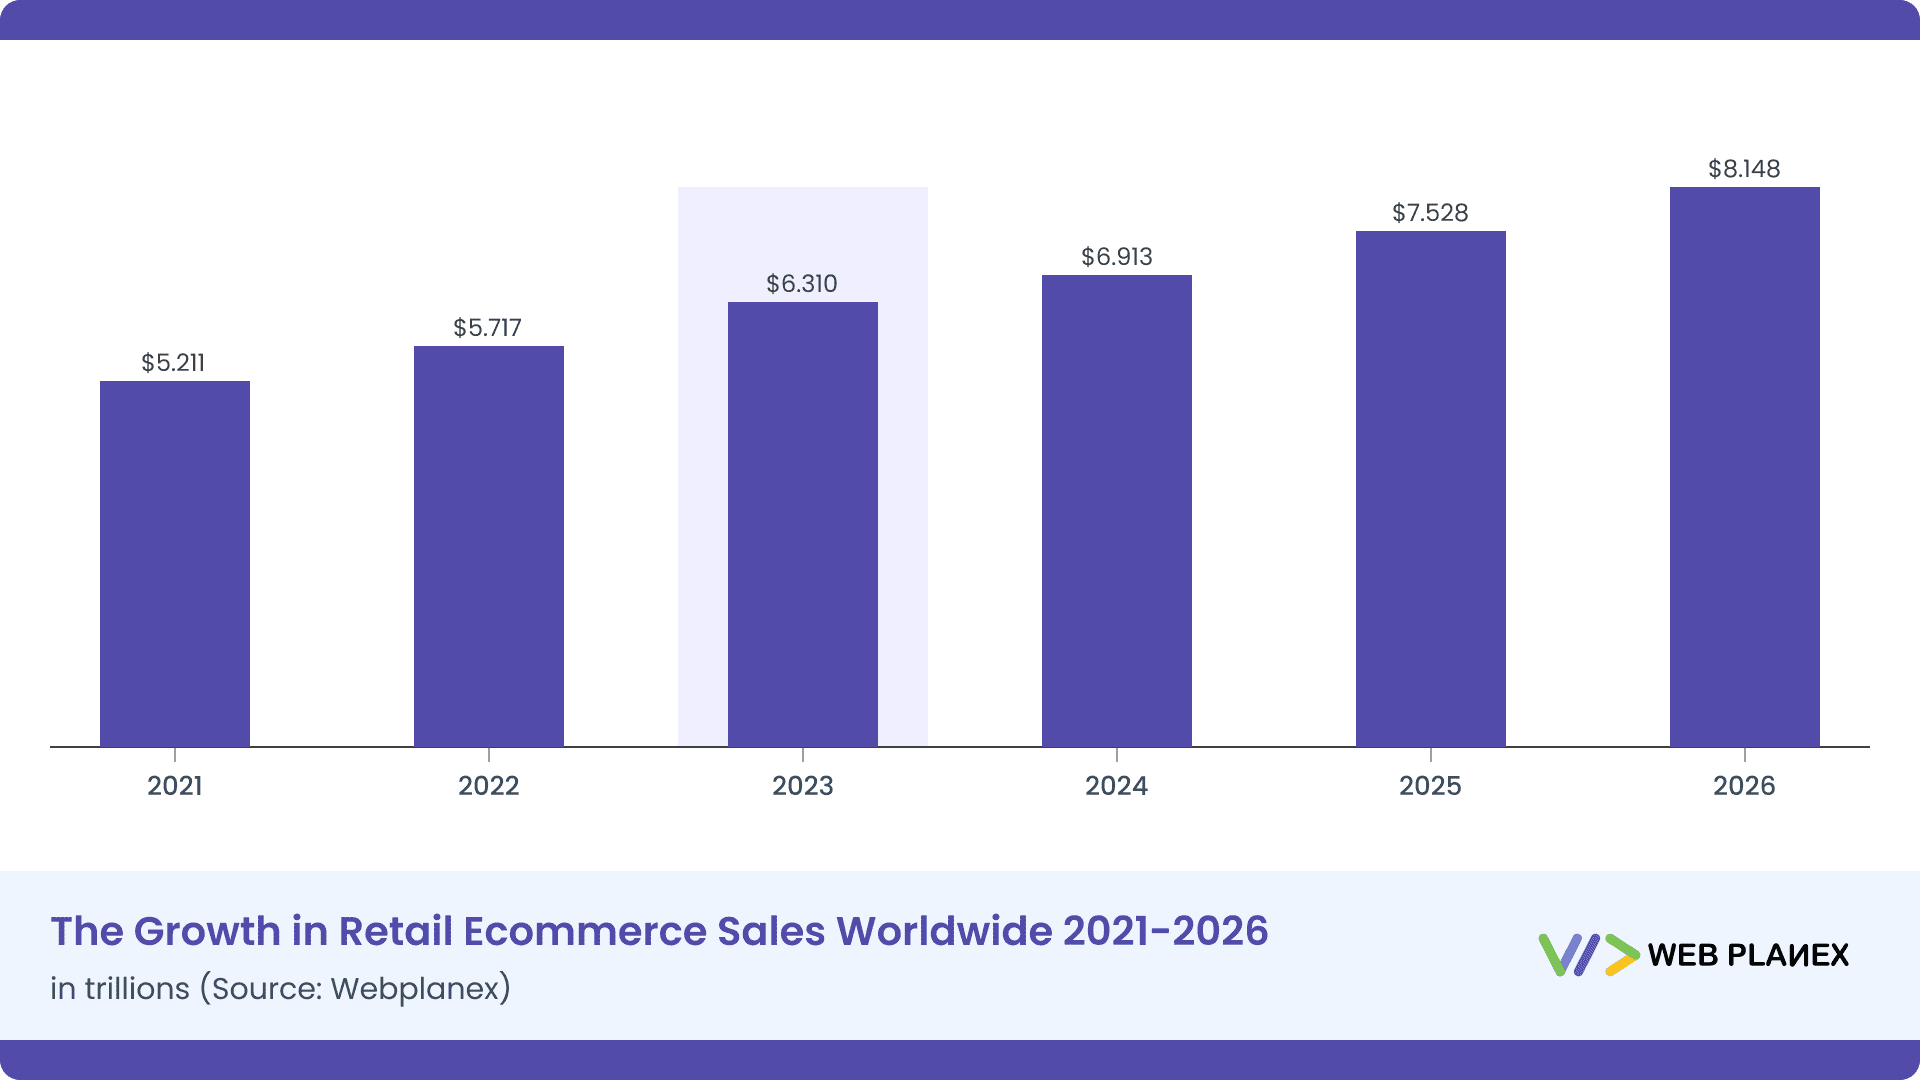 The Growth in Retail Ecommerce Sales Worldwide 2021-2026